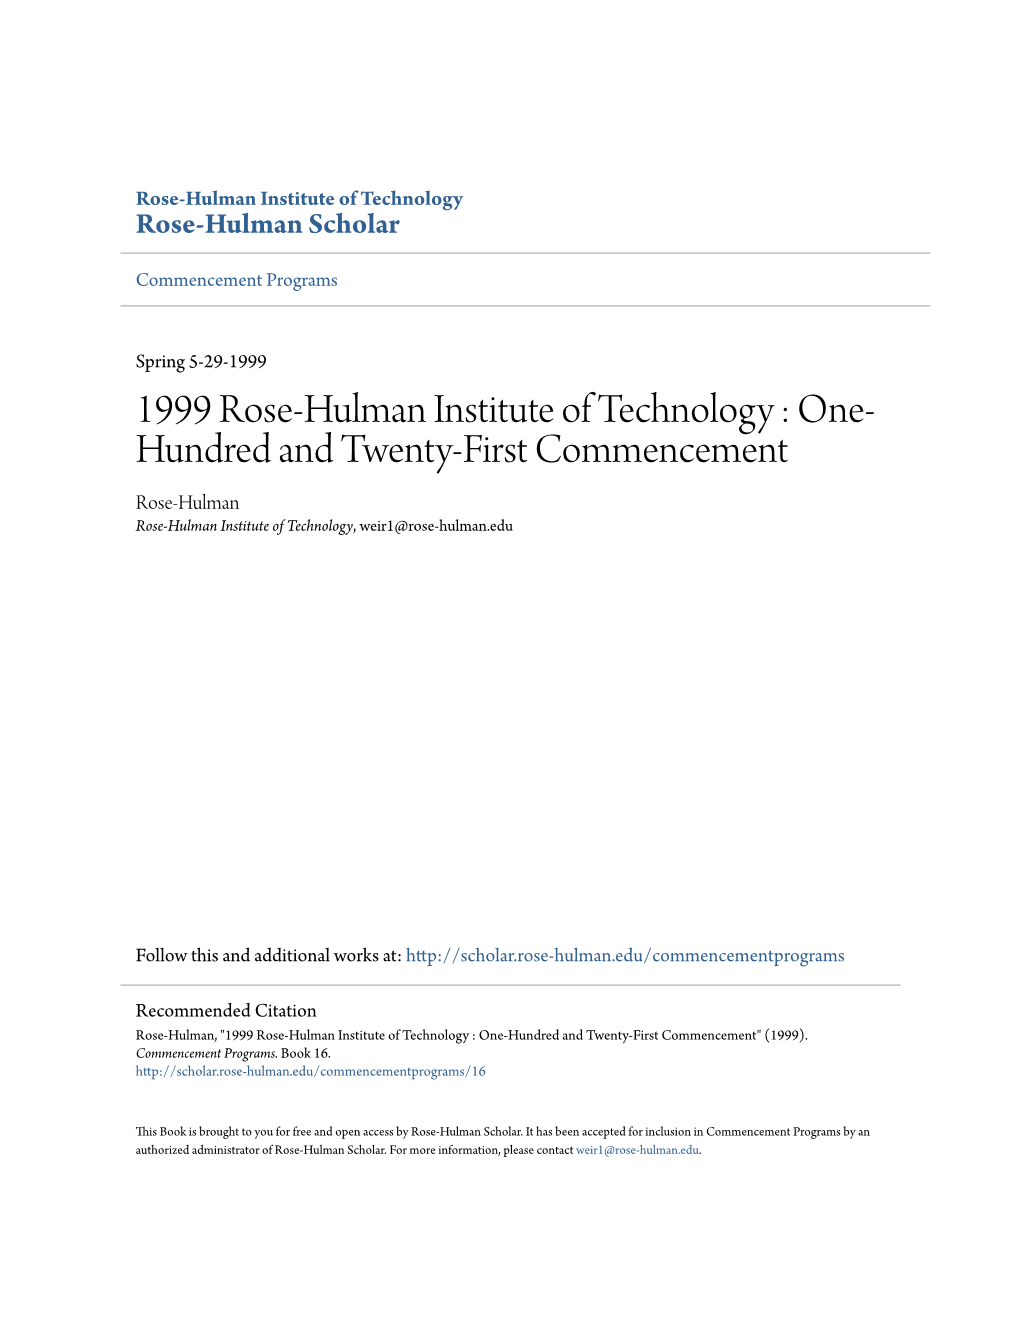 One-Hundred and Twenty-First Commencement" (1999)